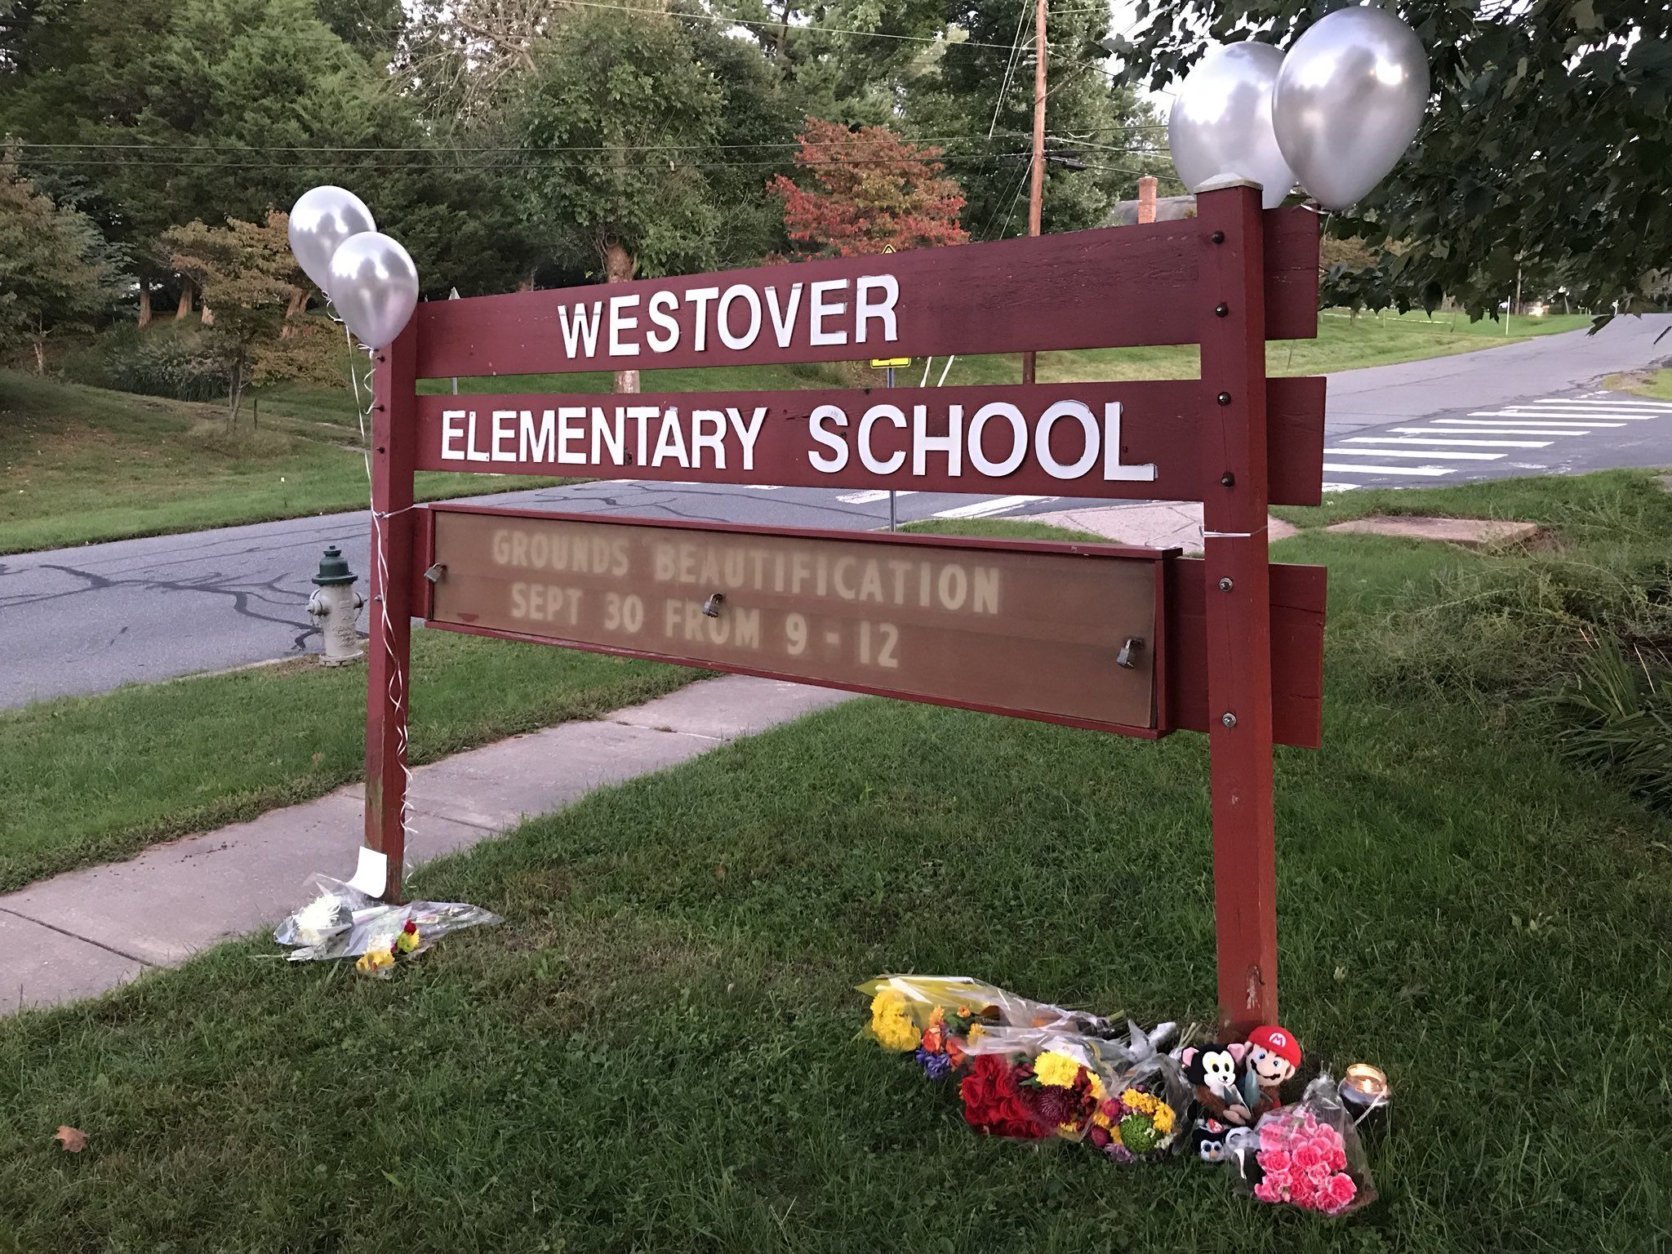 Before the vigil, some people placed flowers and other mementos under the school's wooden sign. (WTOP/Michelle Basch)